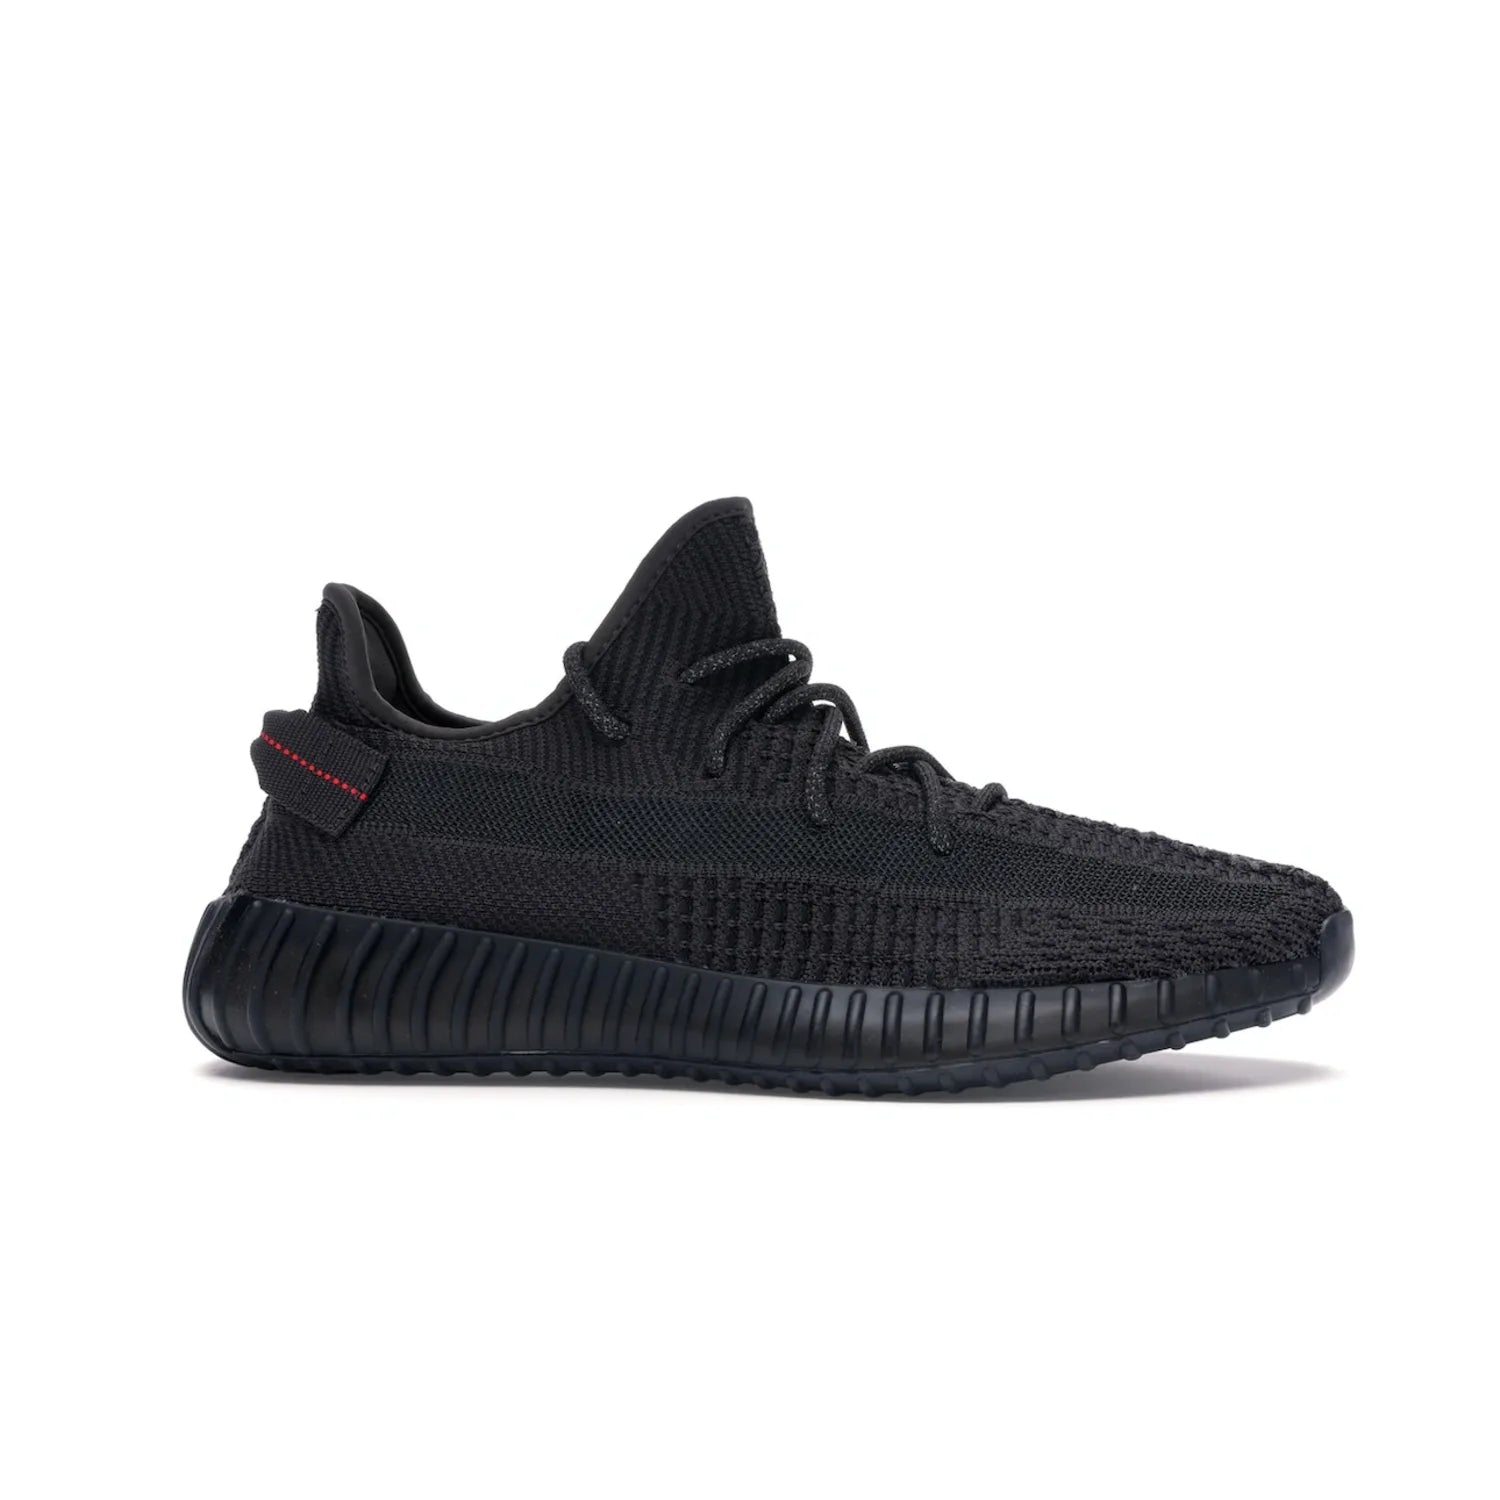 adidas Yeezy Boost 350 V2 Black (Non-Reflective) - Image 2 - Only at www.BallersClubKickz.com - A timeless, sleek silhouette crafted from quality materials. The adidas Yeezy Boost 350 V2 Black (Non-Reflective) brings style and sophistication. Get yours now!